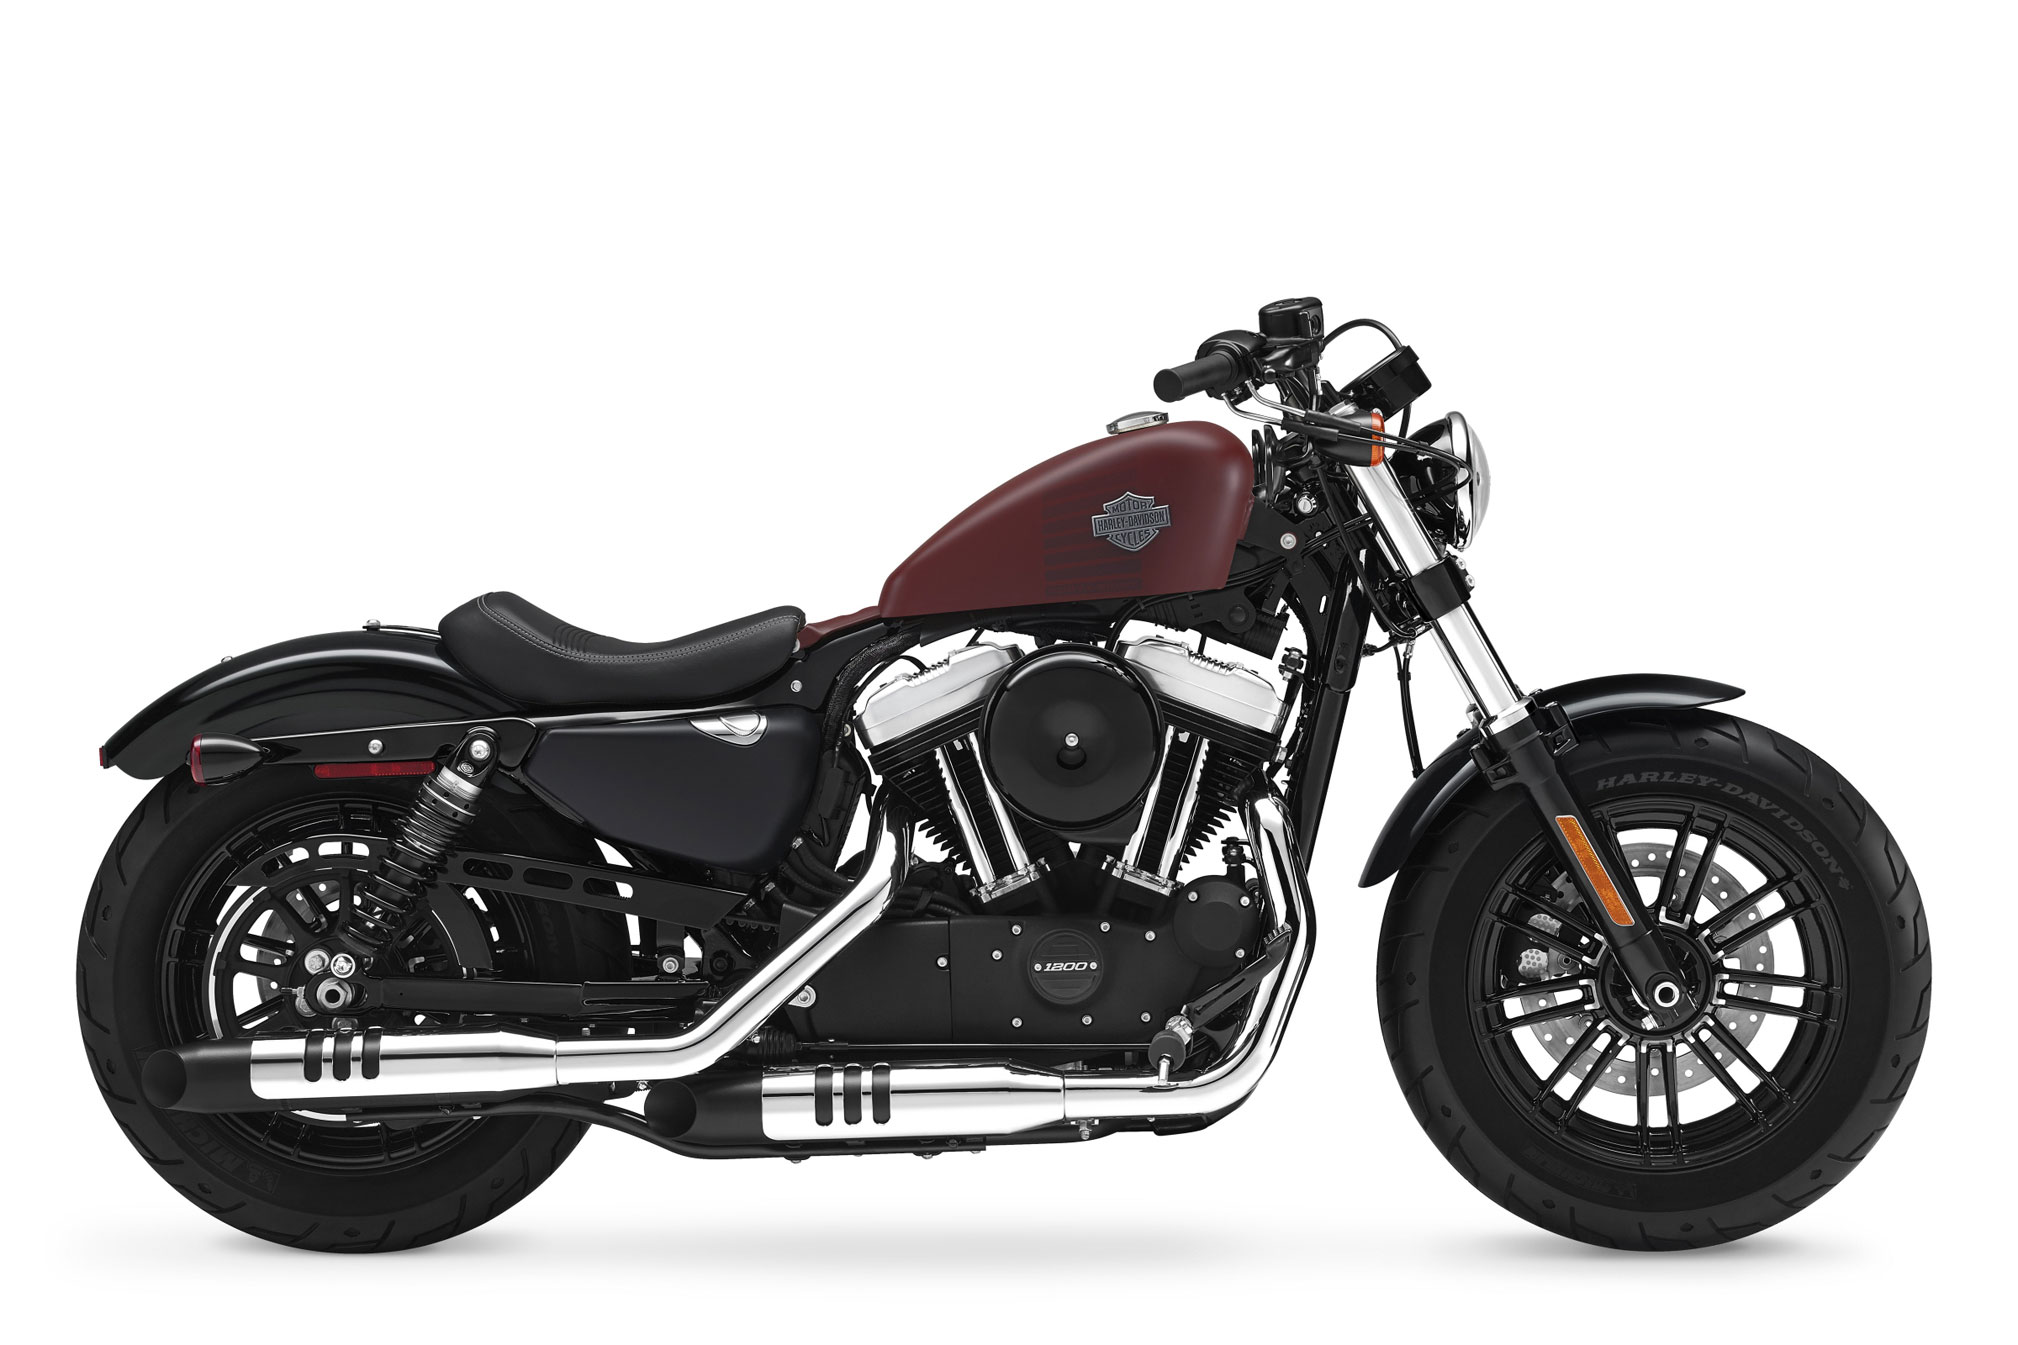 2019 Harley  Davidson  Forty  Eight  Review  Total Motorcycle